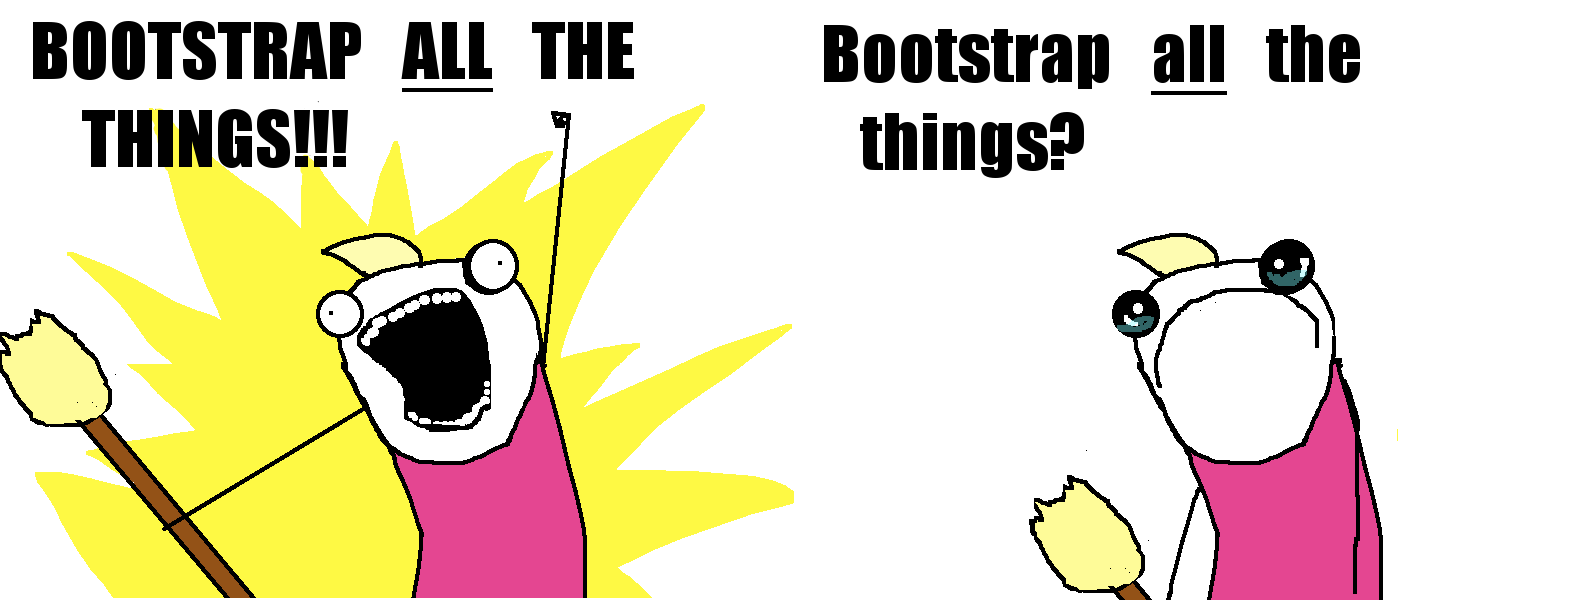 Cartoon image of Bootstrap all the things.